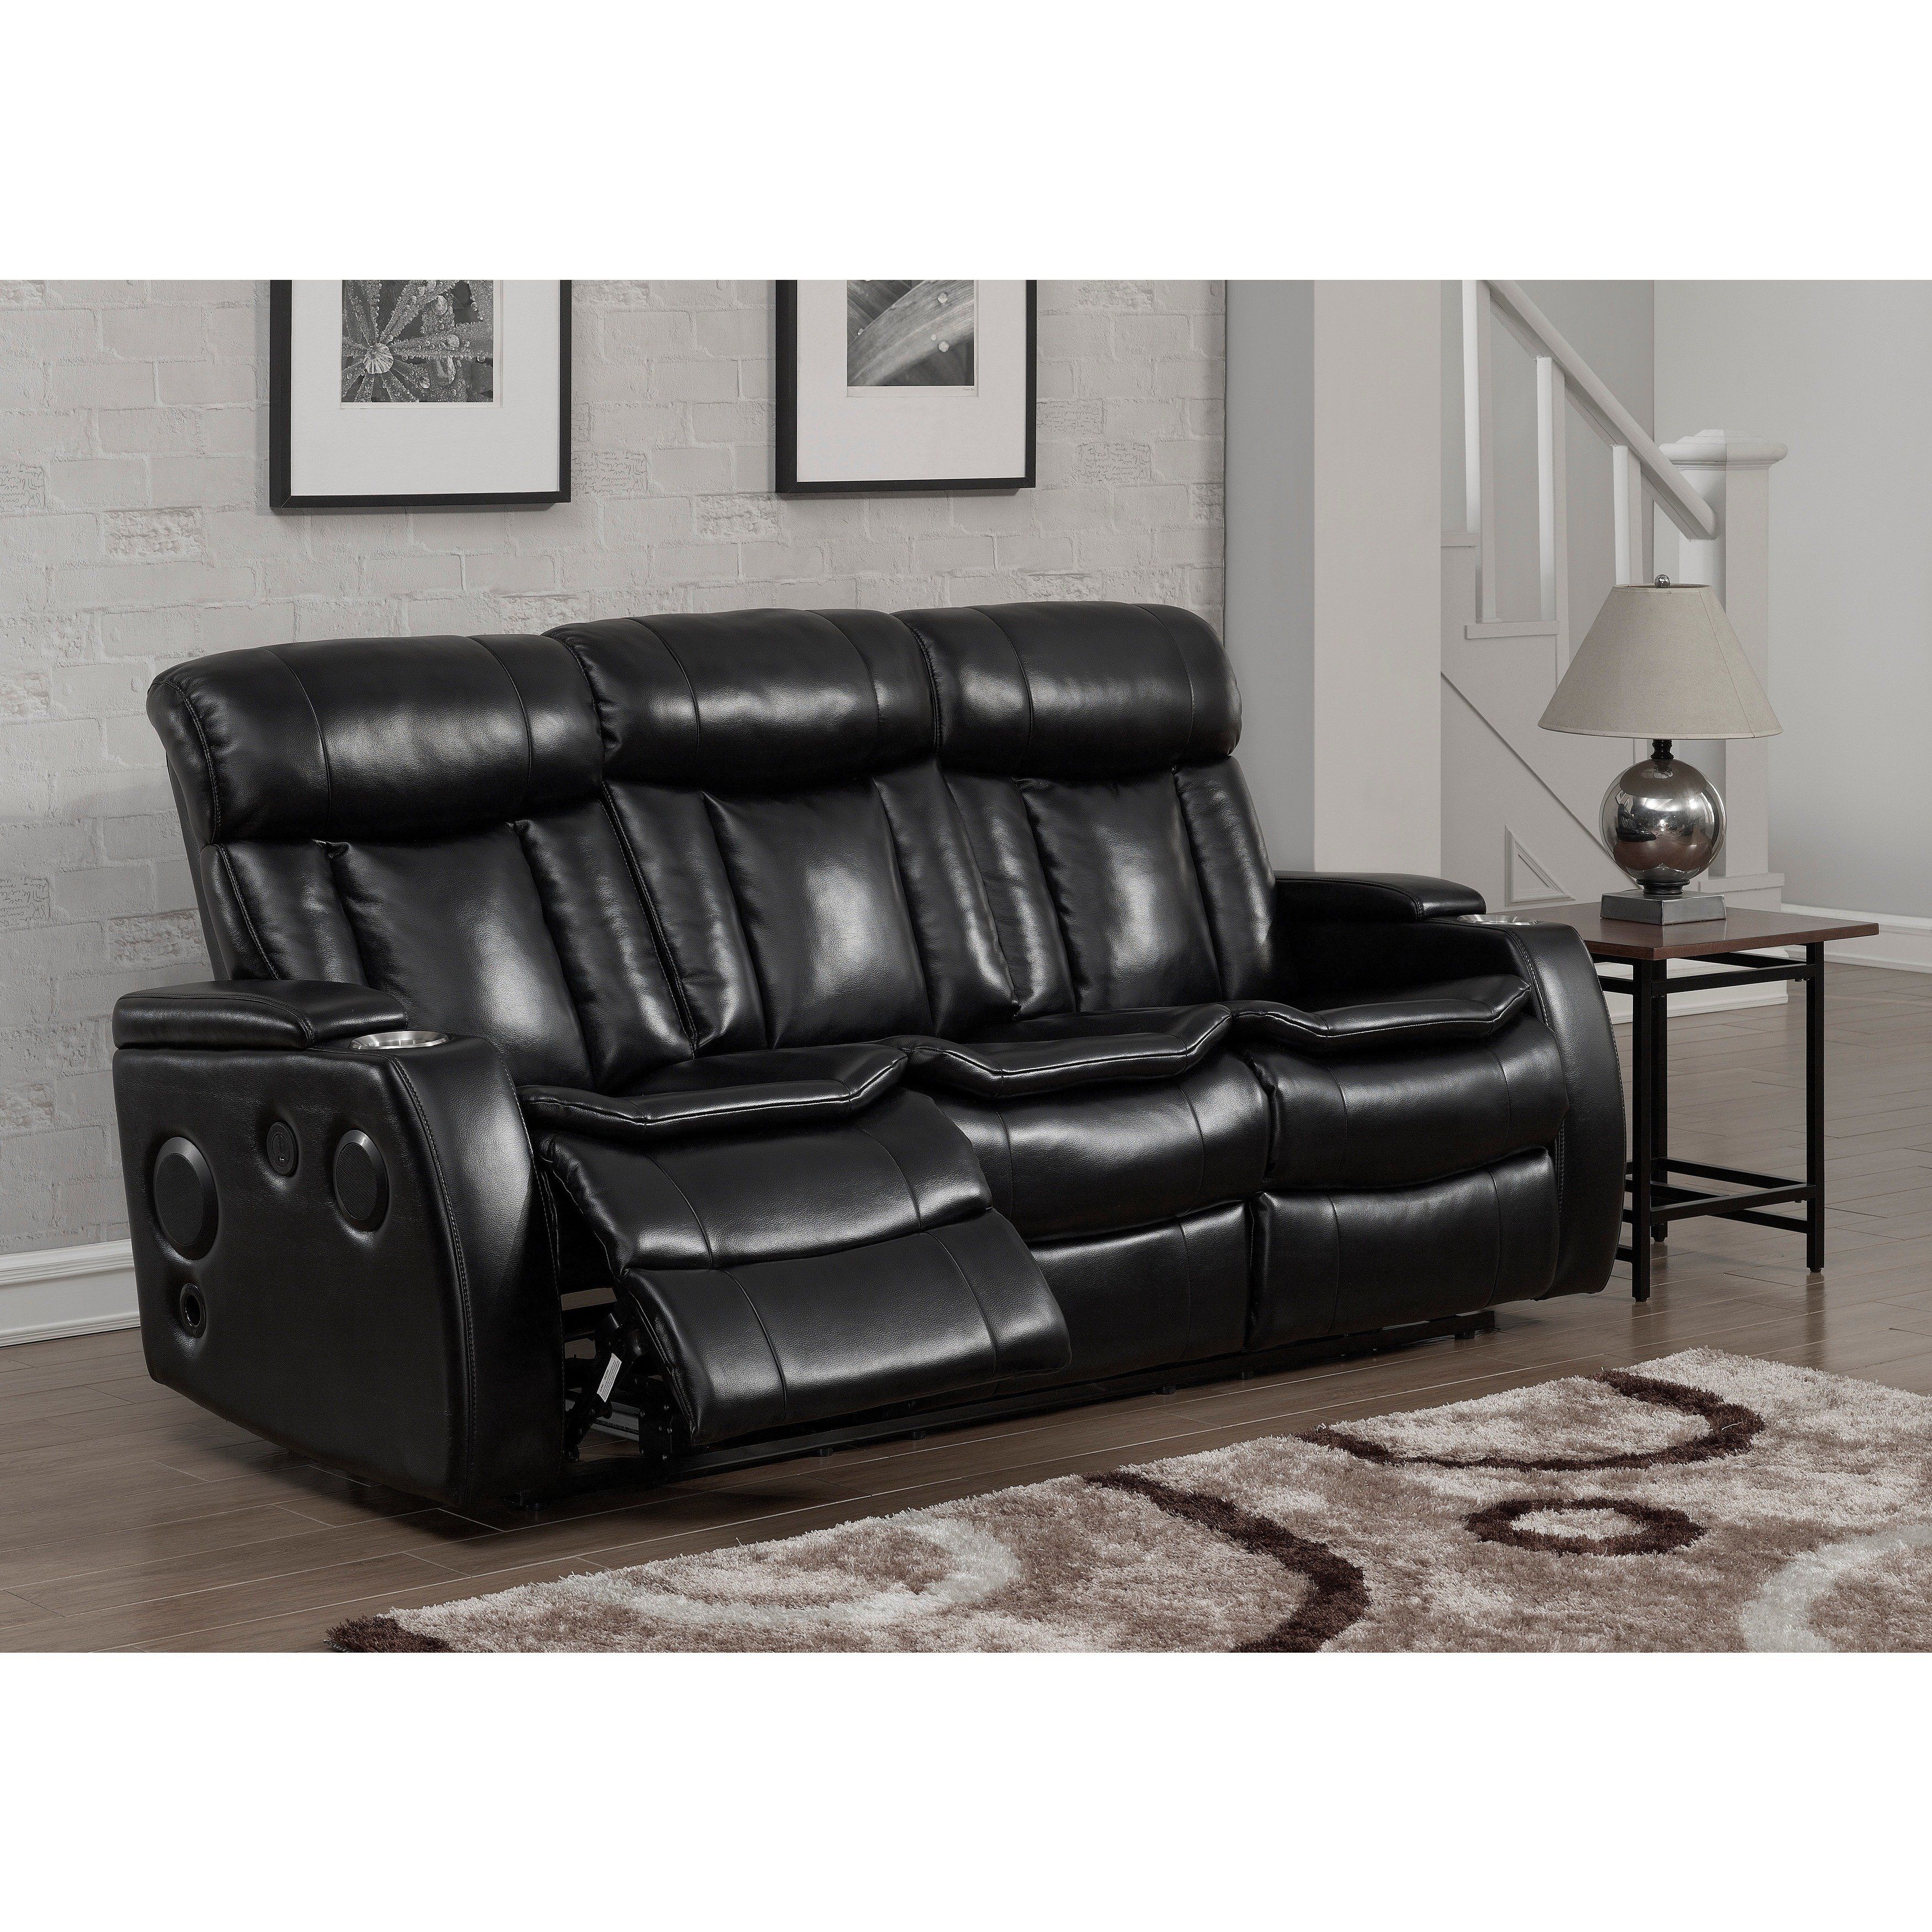 Delano Power Reclining Sofa With Usb | Baci Living Room Regarding Clyde Grey Leather 3 Piece Power Reclining Sectionals With Pwr Hdrst & Usb (View 16 of 25)